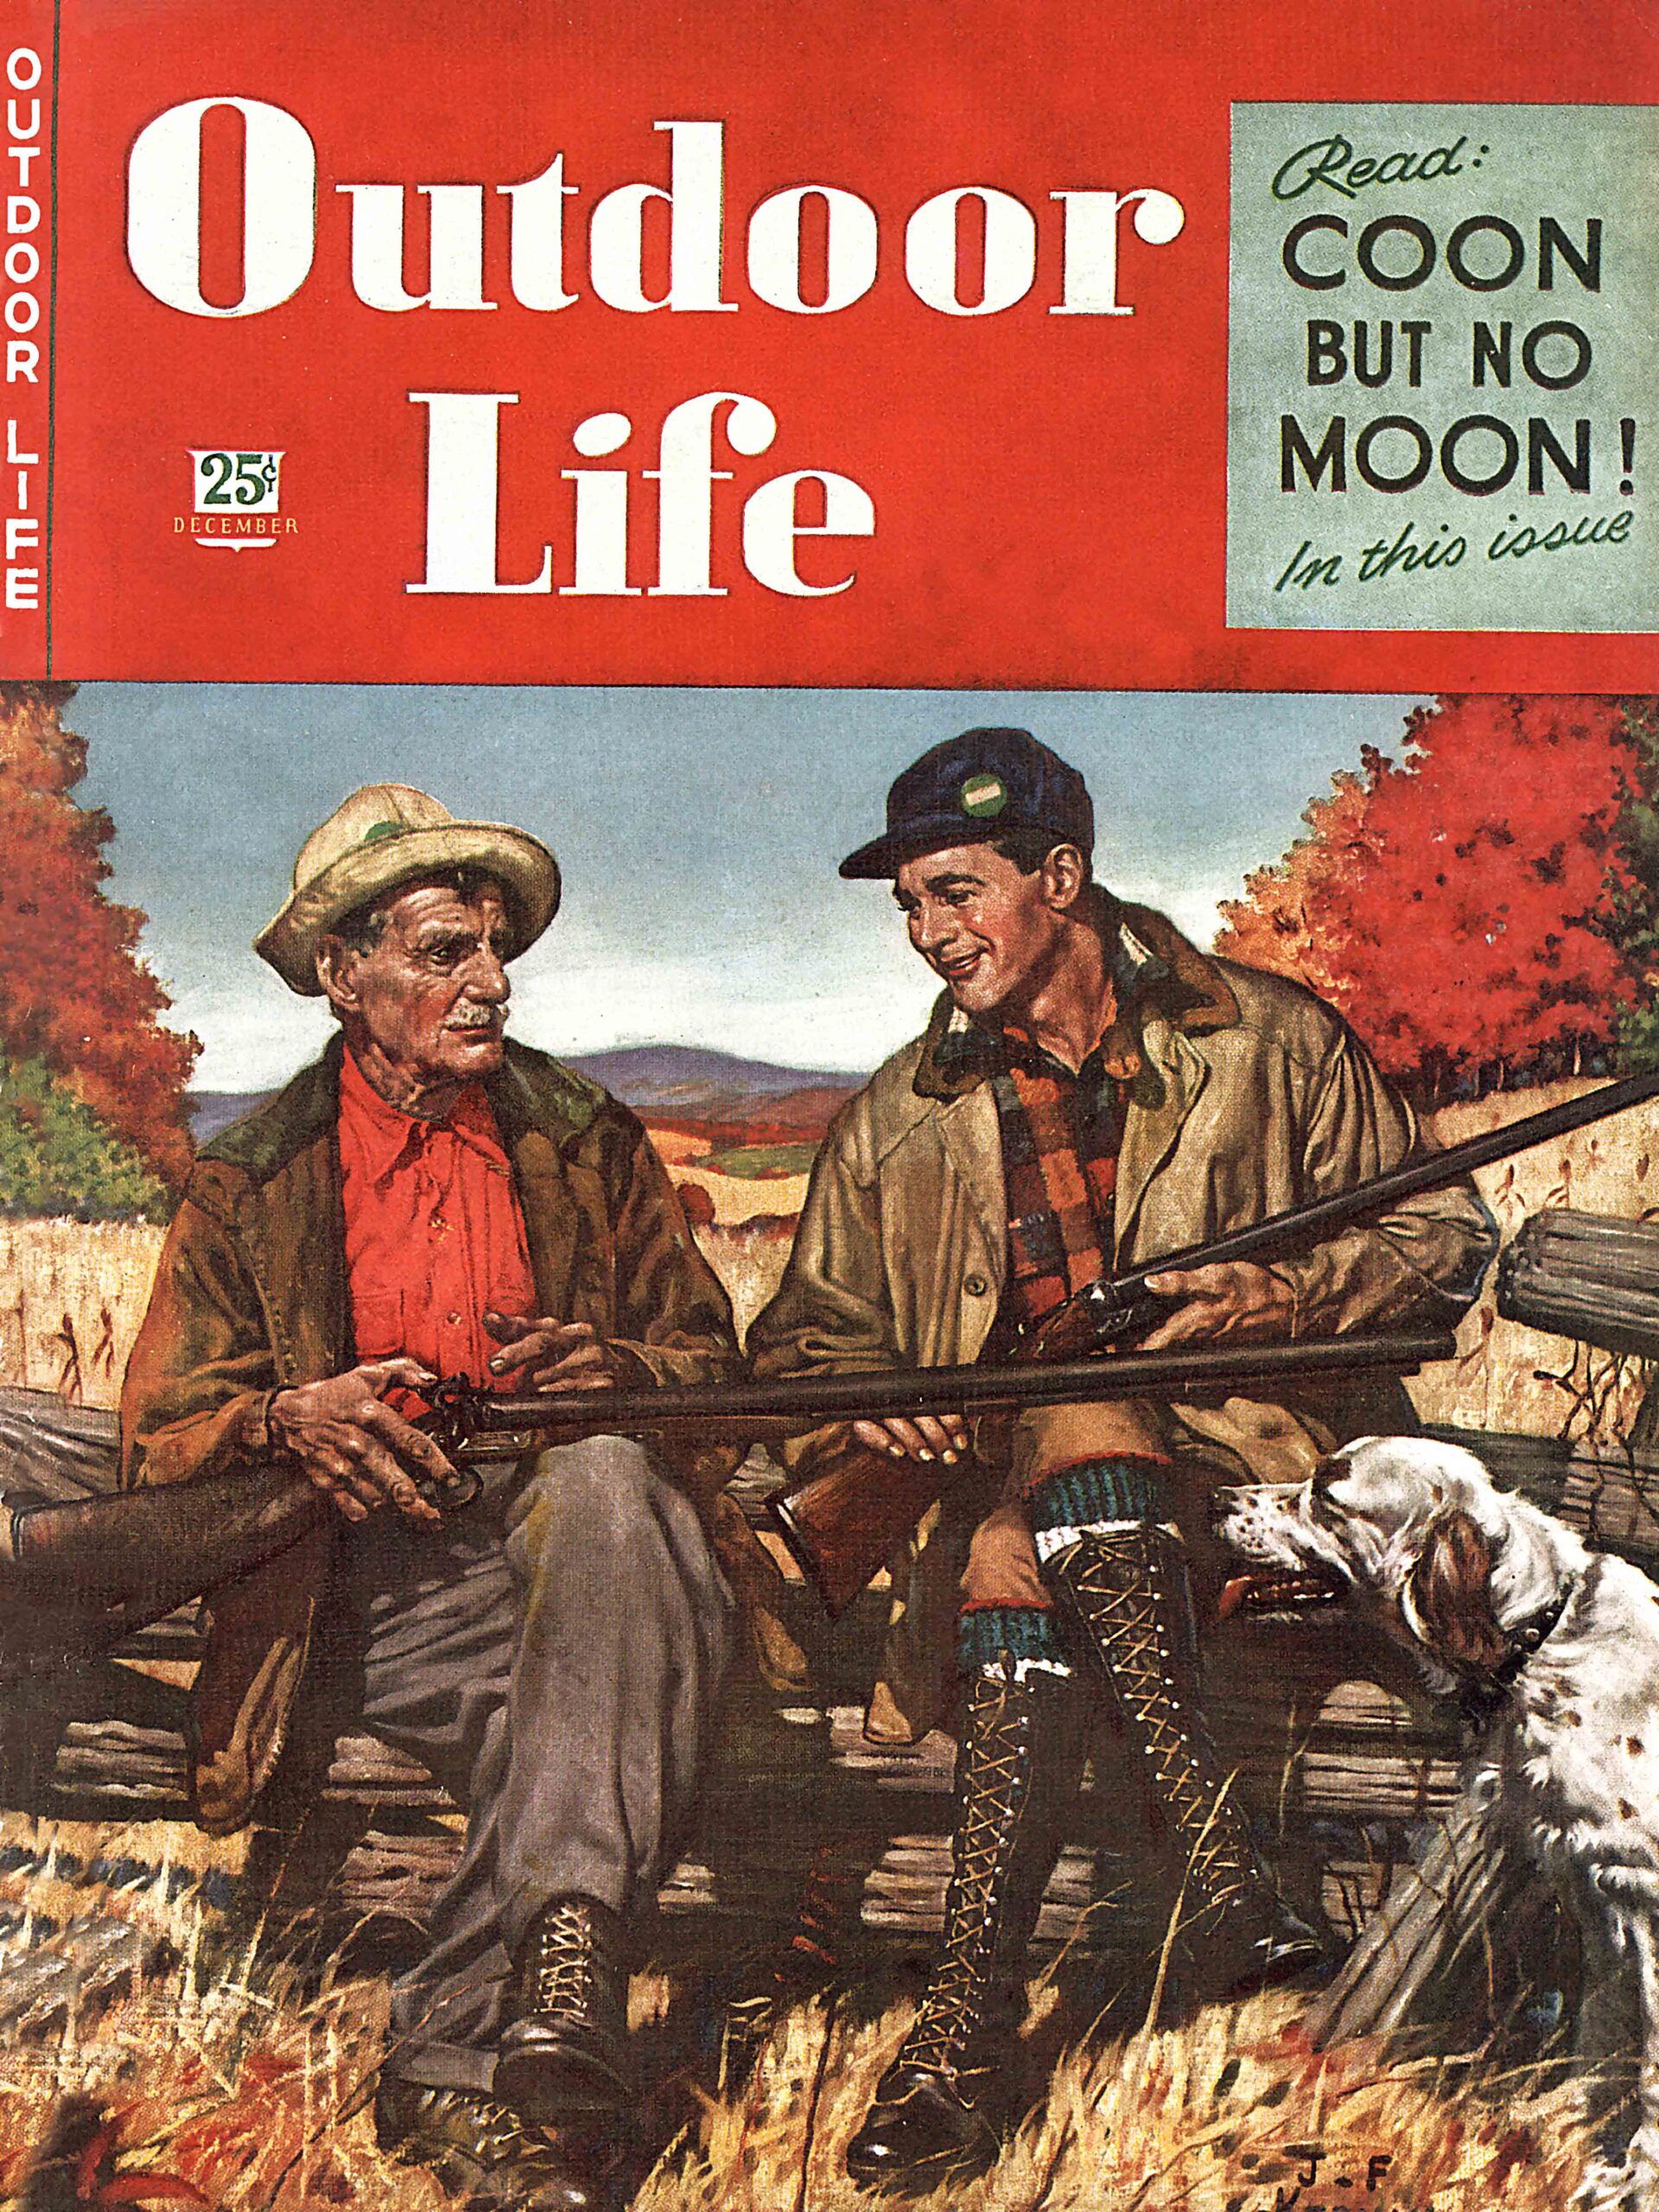 December 1946 cover of Outdoor Life magazine has a painting of two bird hunters resting on a fallen fence with a setter.